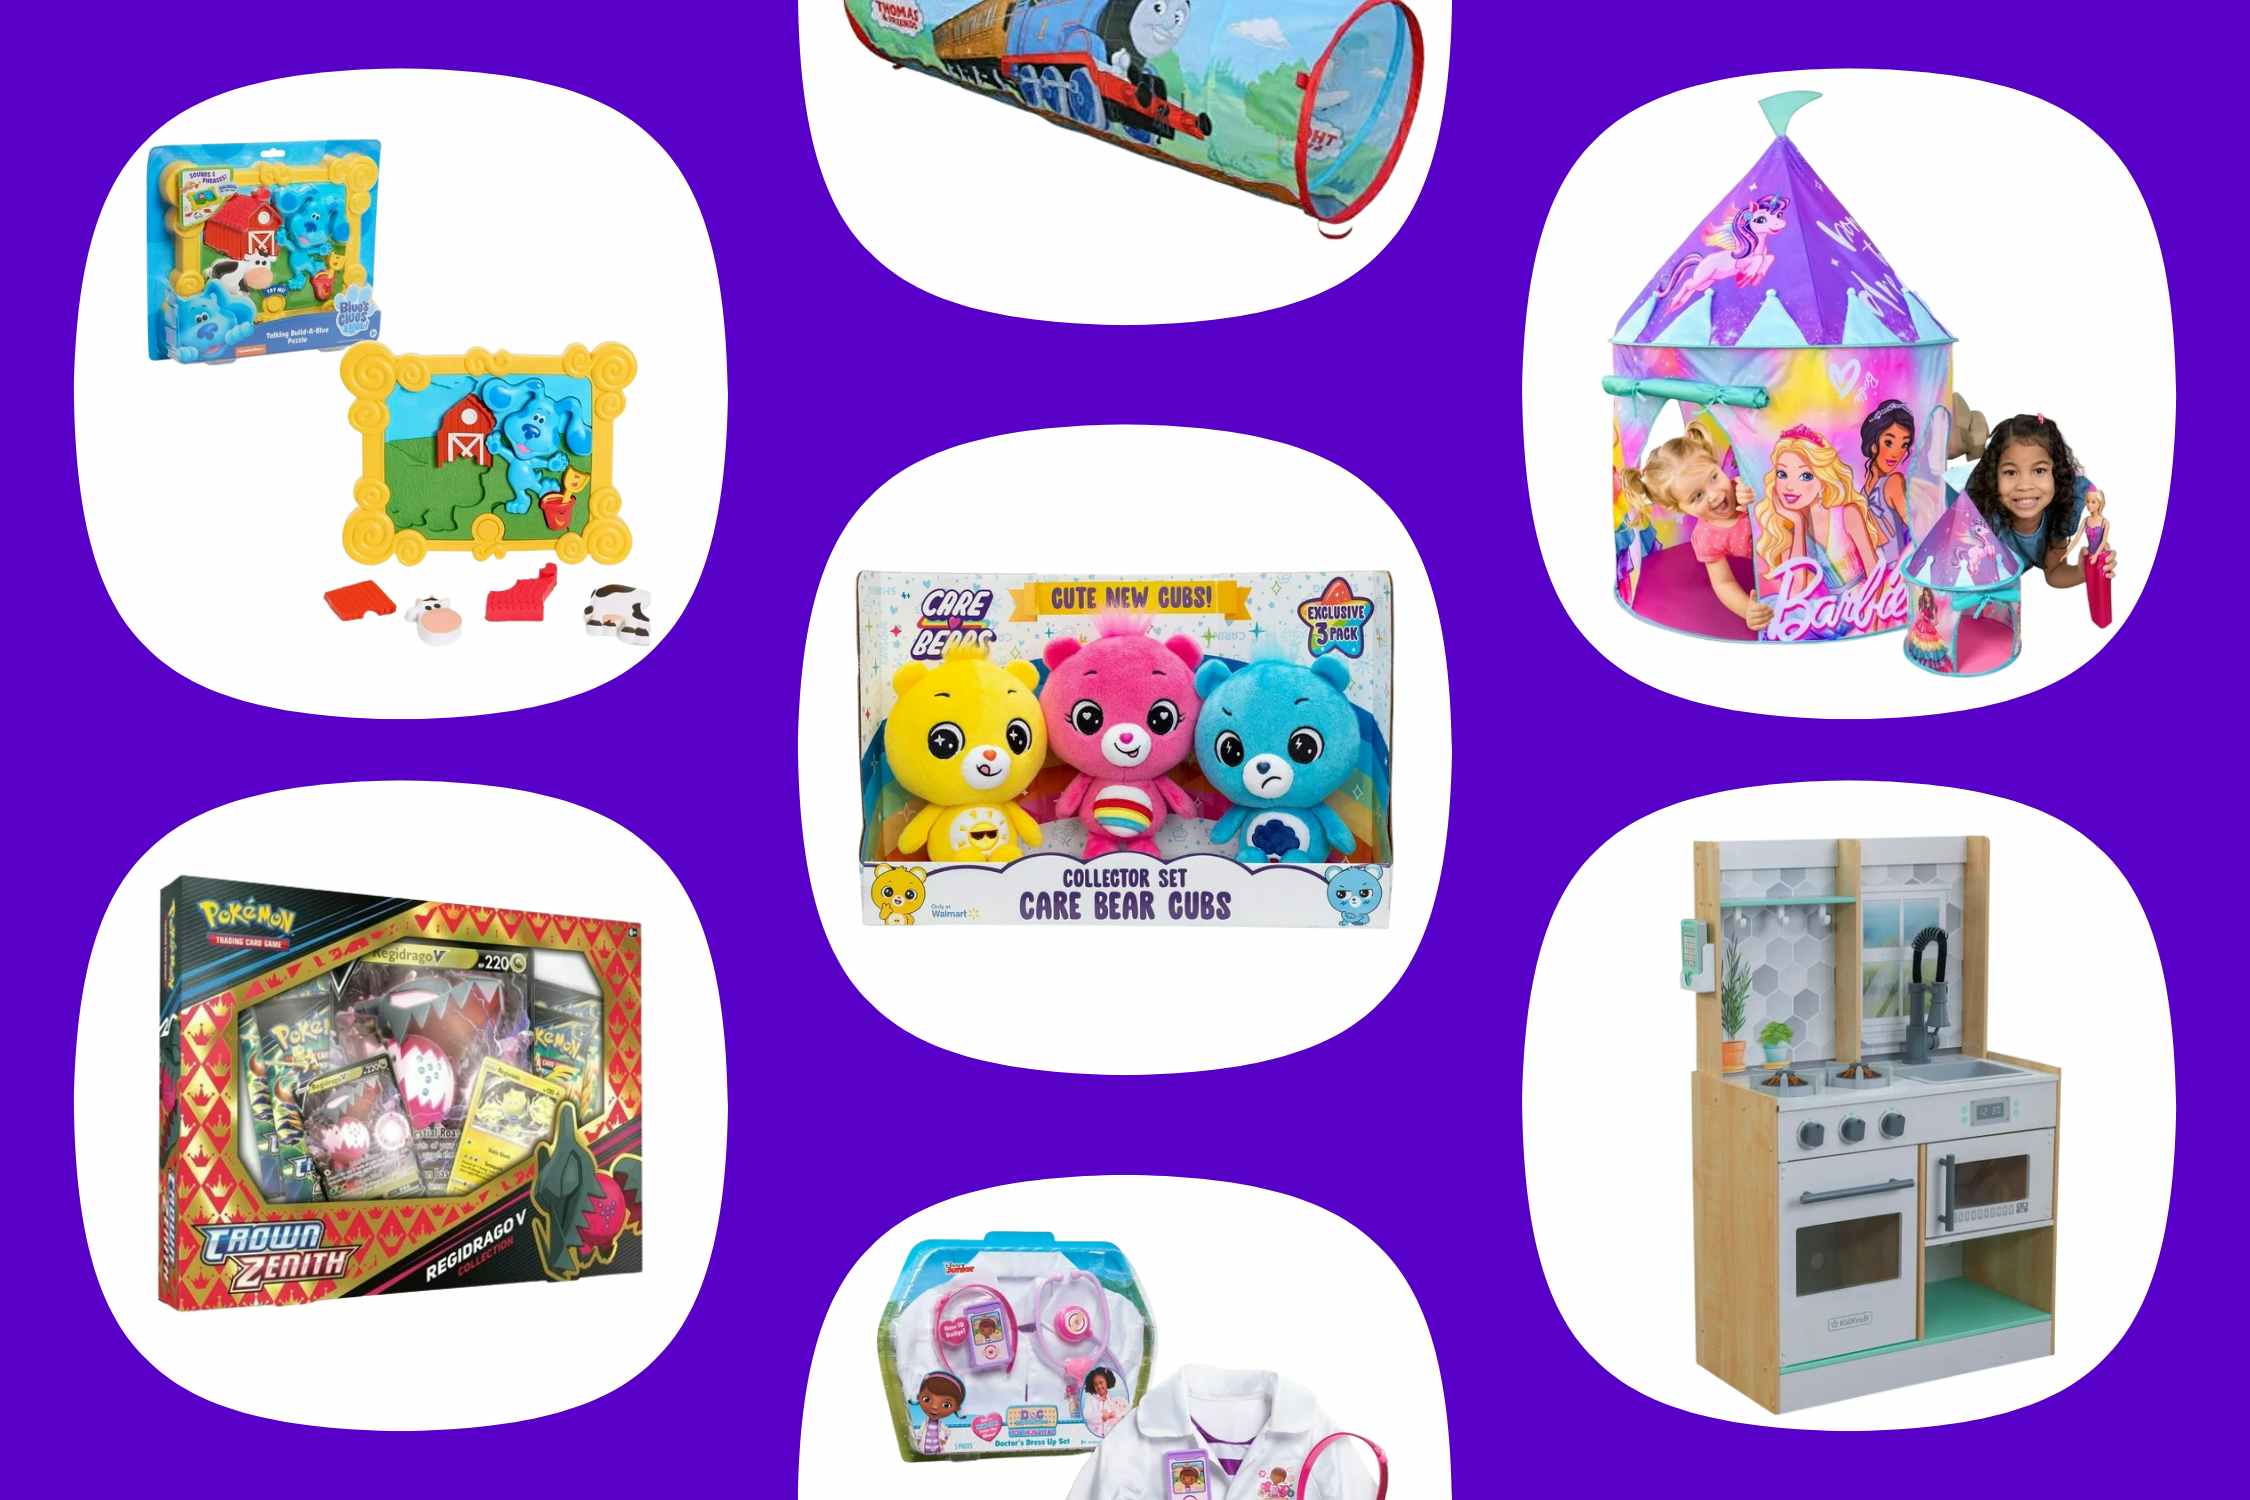 Walmart.com Toy Clearance: $6 CoComelon Plush, $45 Play Kitchen, and More